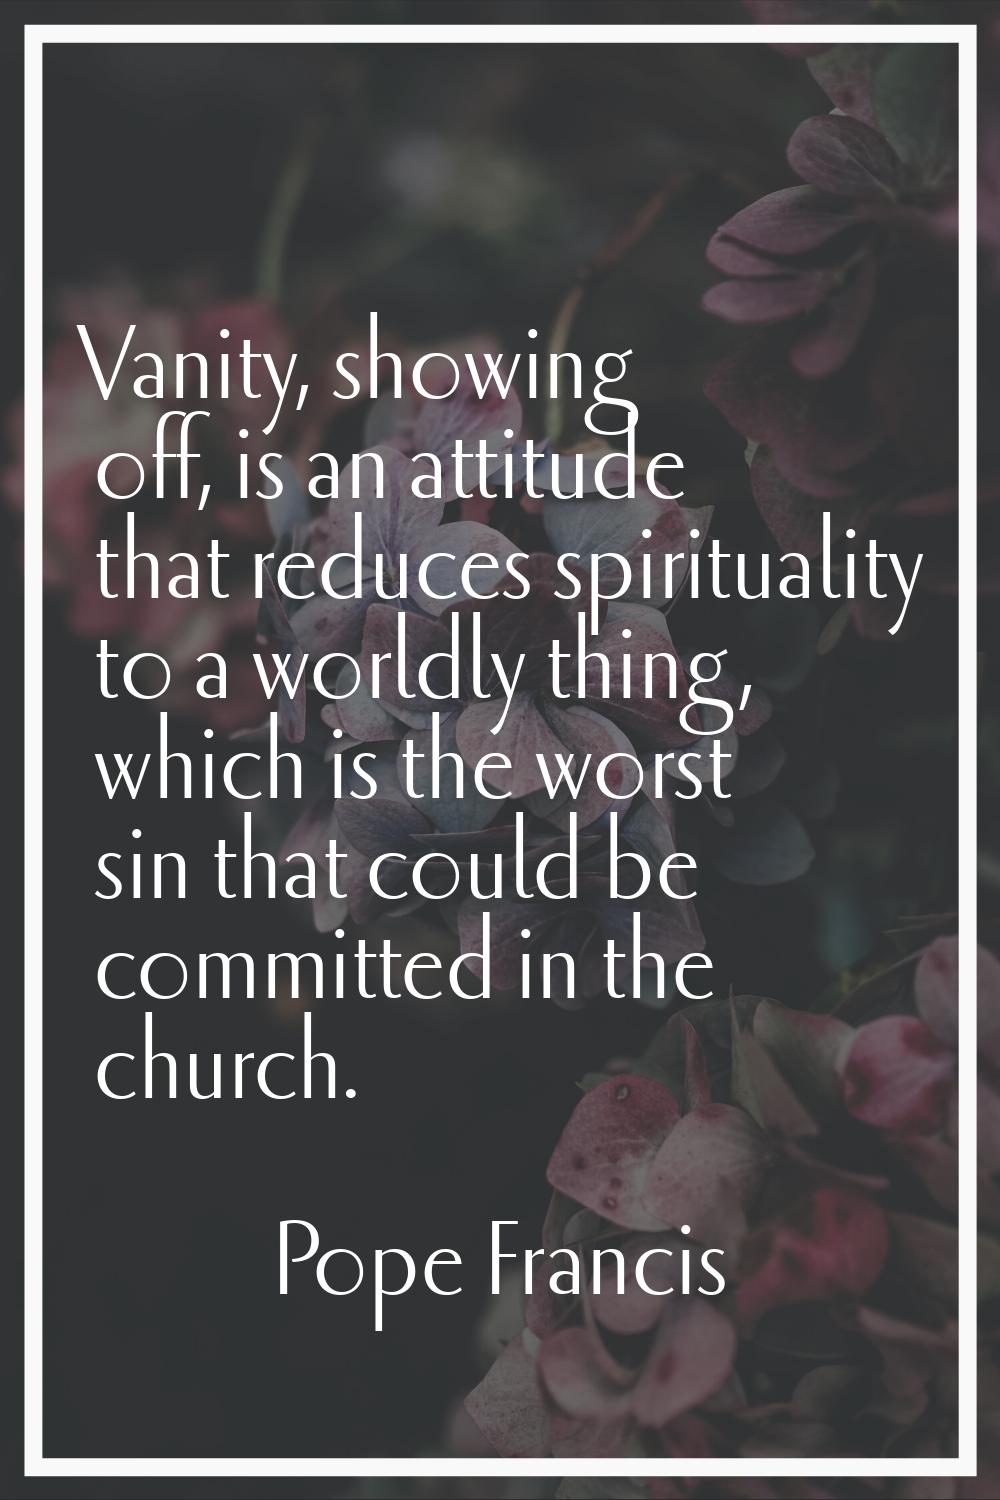 Vanity, showing off, is an attitude that reduces spirituality to a worldly thing, which is the wors